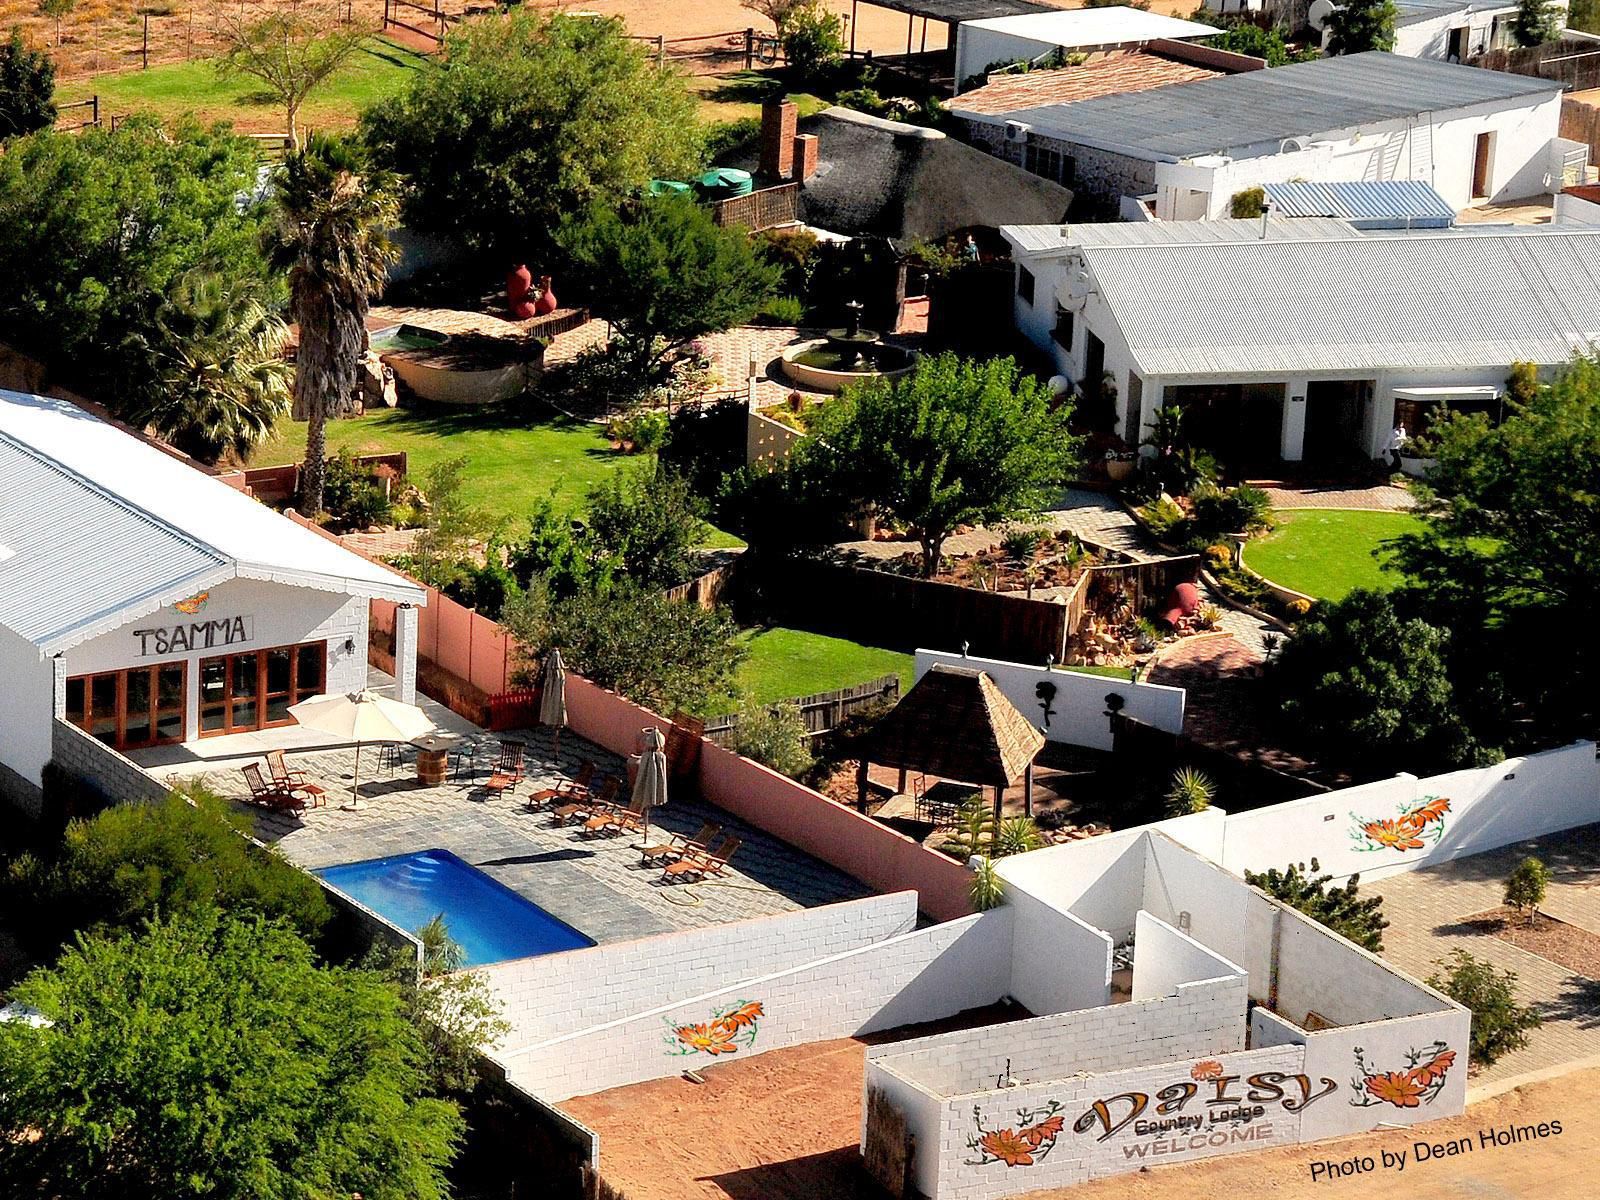 Daisy Country Lodge Springbok Northern Cape South Africa House, Building, Architecture, Swimming Pool